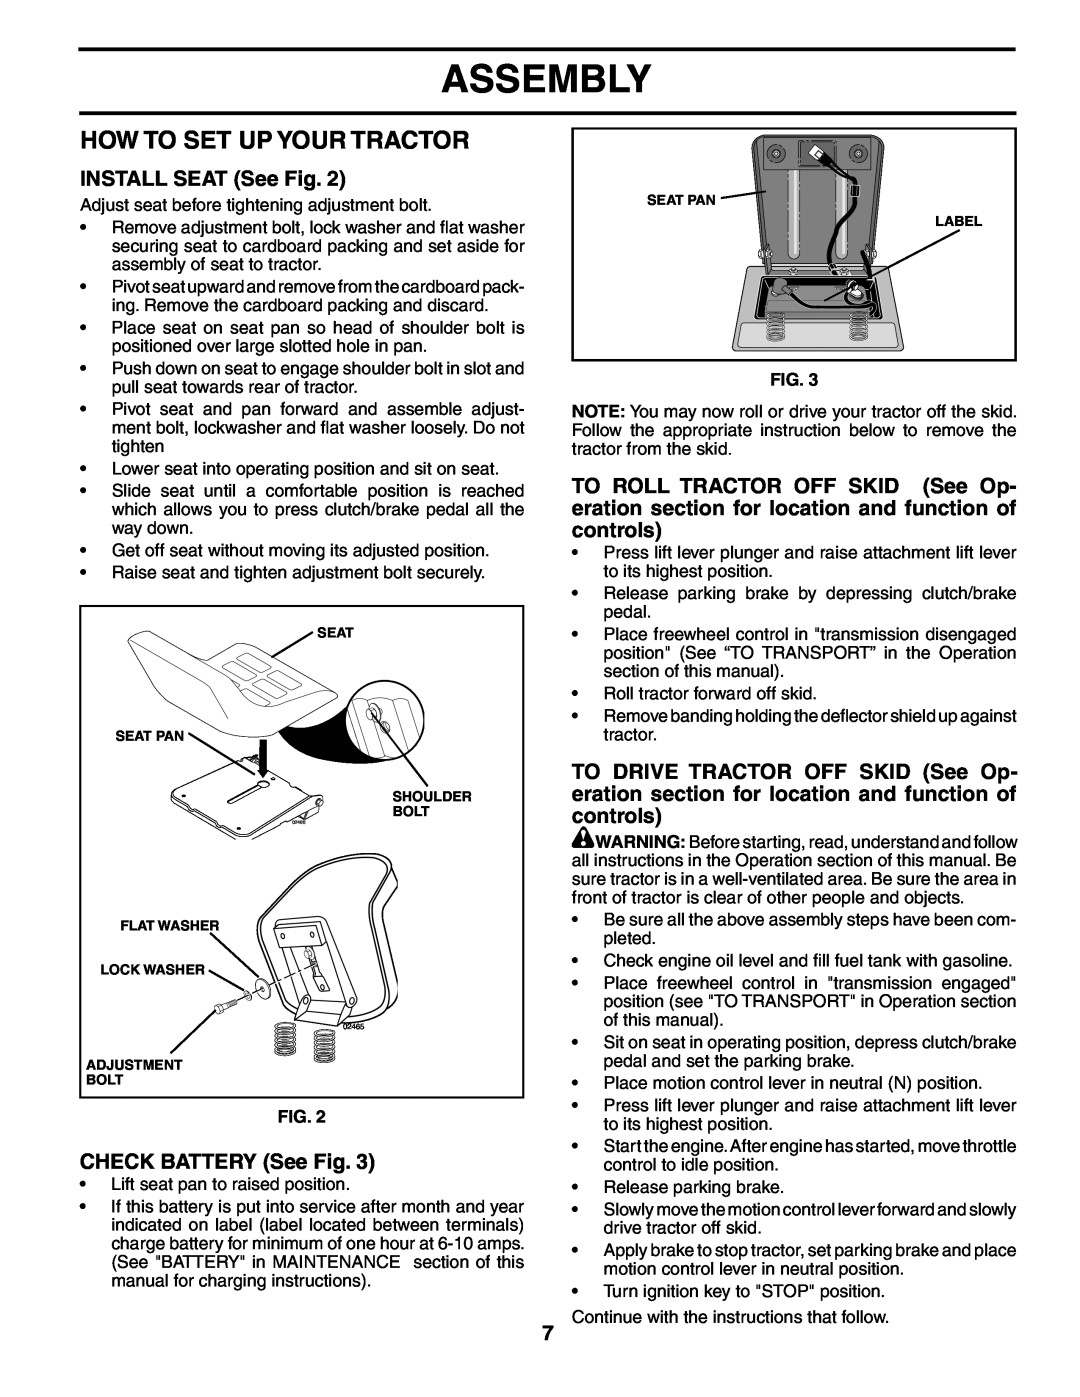 Poulan PO175H42STA manual How To Set Up Your Tractor, INSTALL SEAT See Fig, CHECK BATTERY See Fig, Assembly 